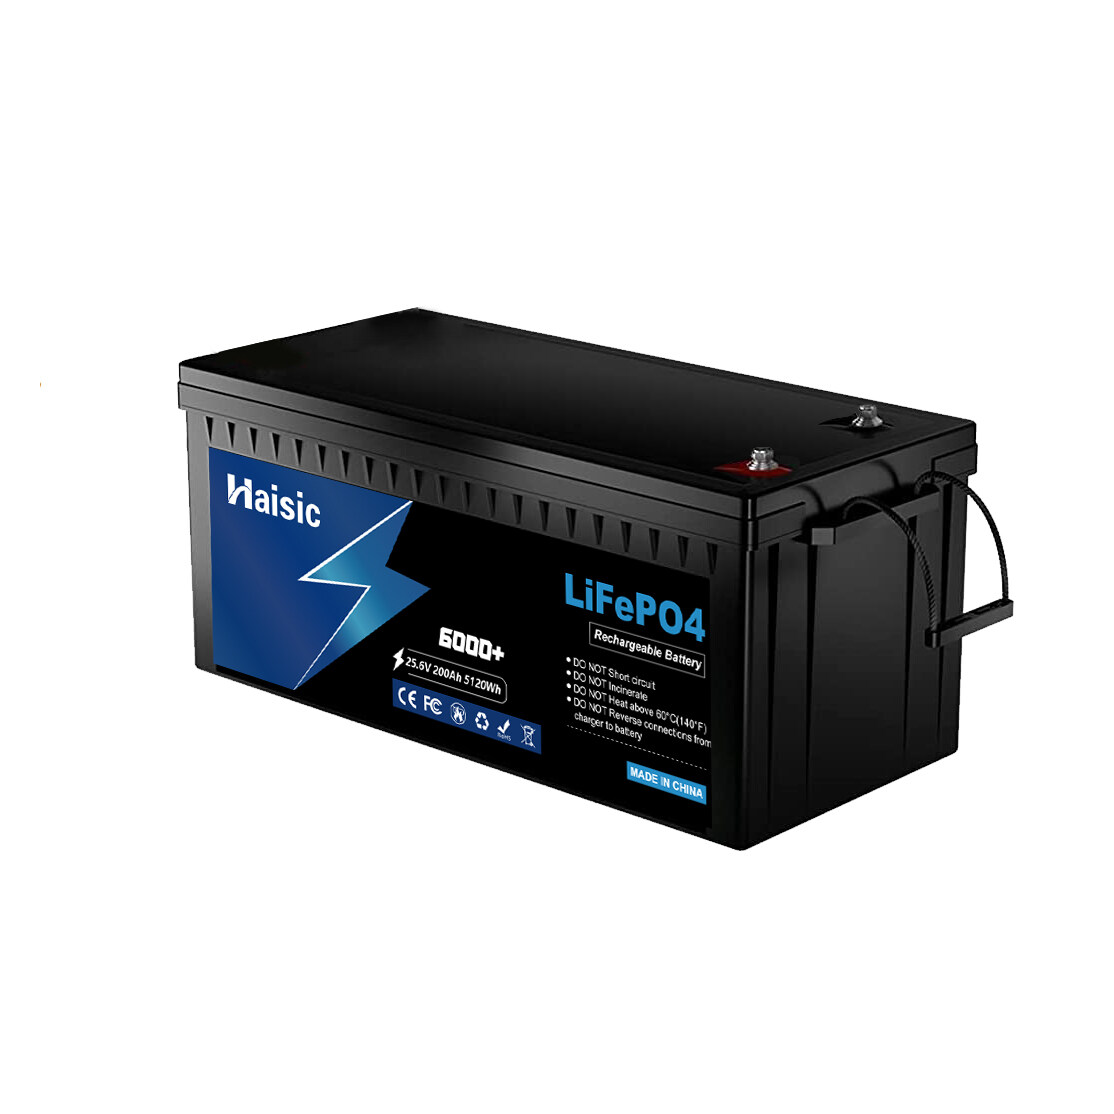 lifepo4 lithium battery pack factory, lifepo4 lithium battery pack manufacturer